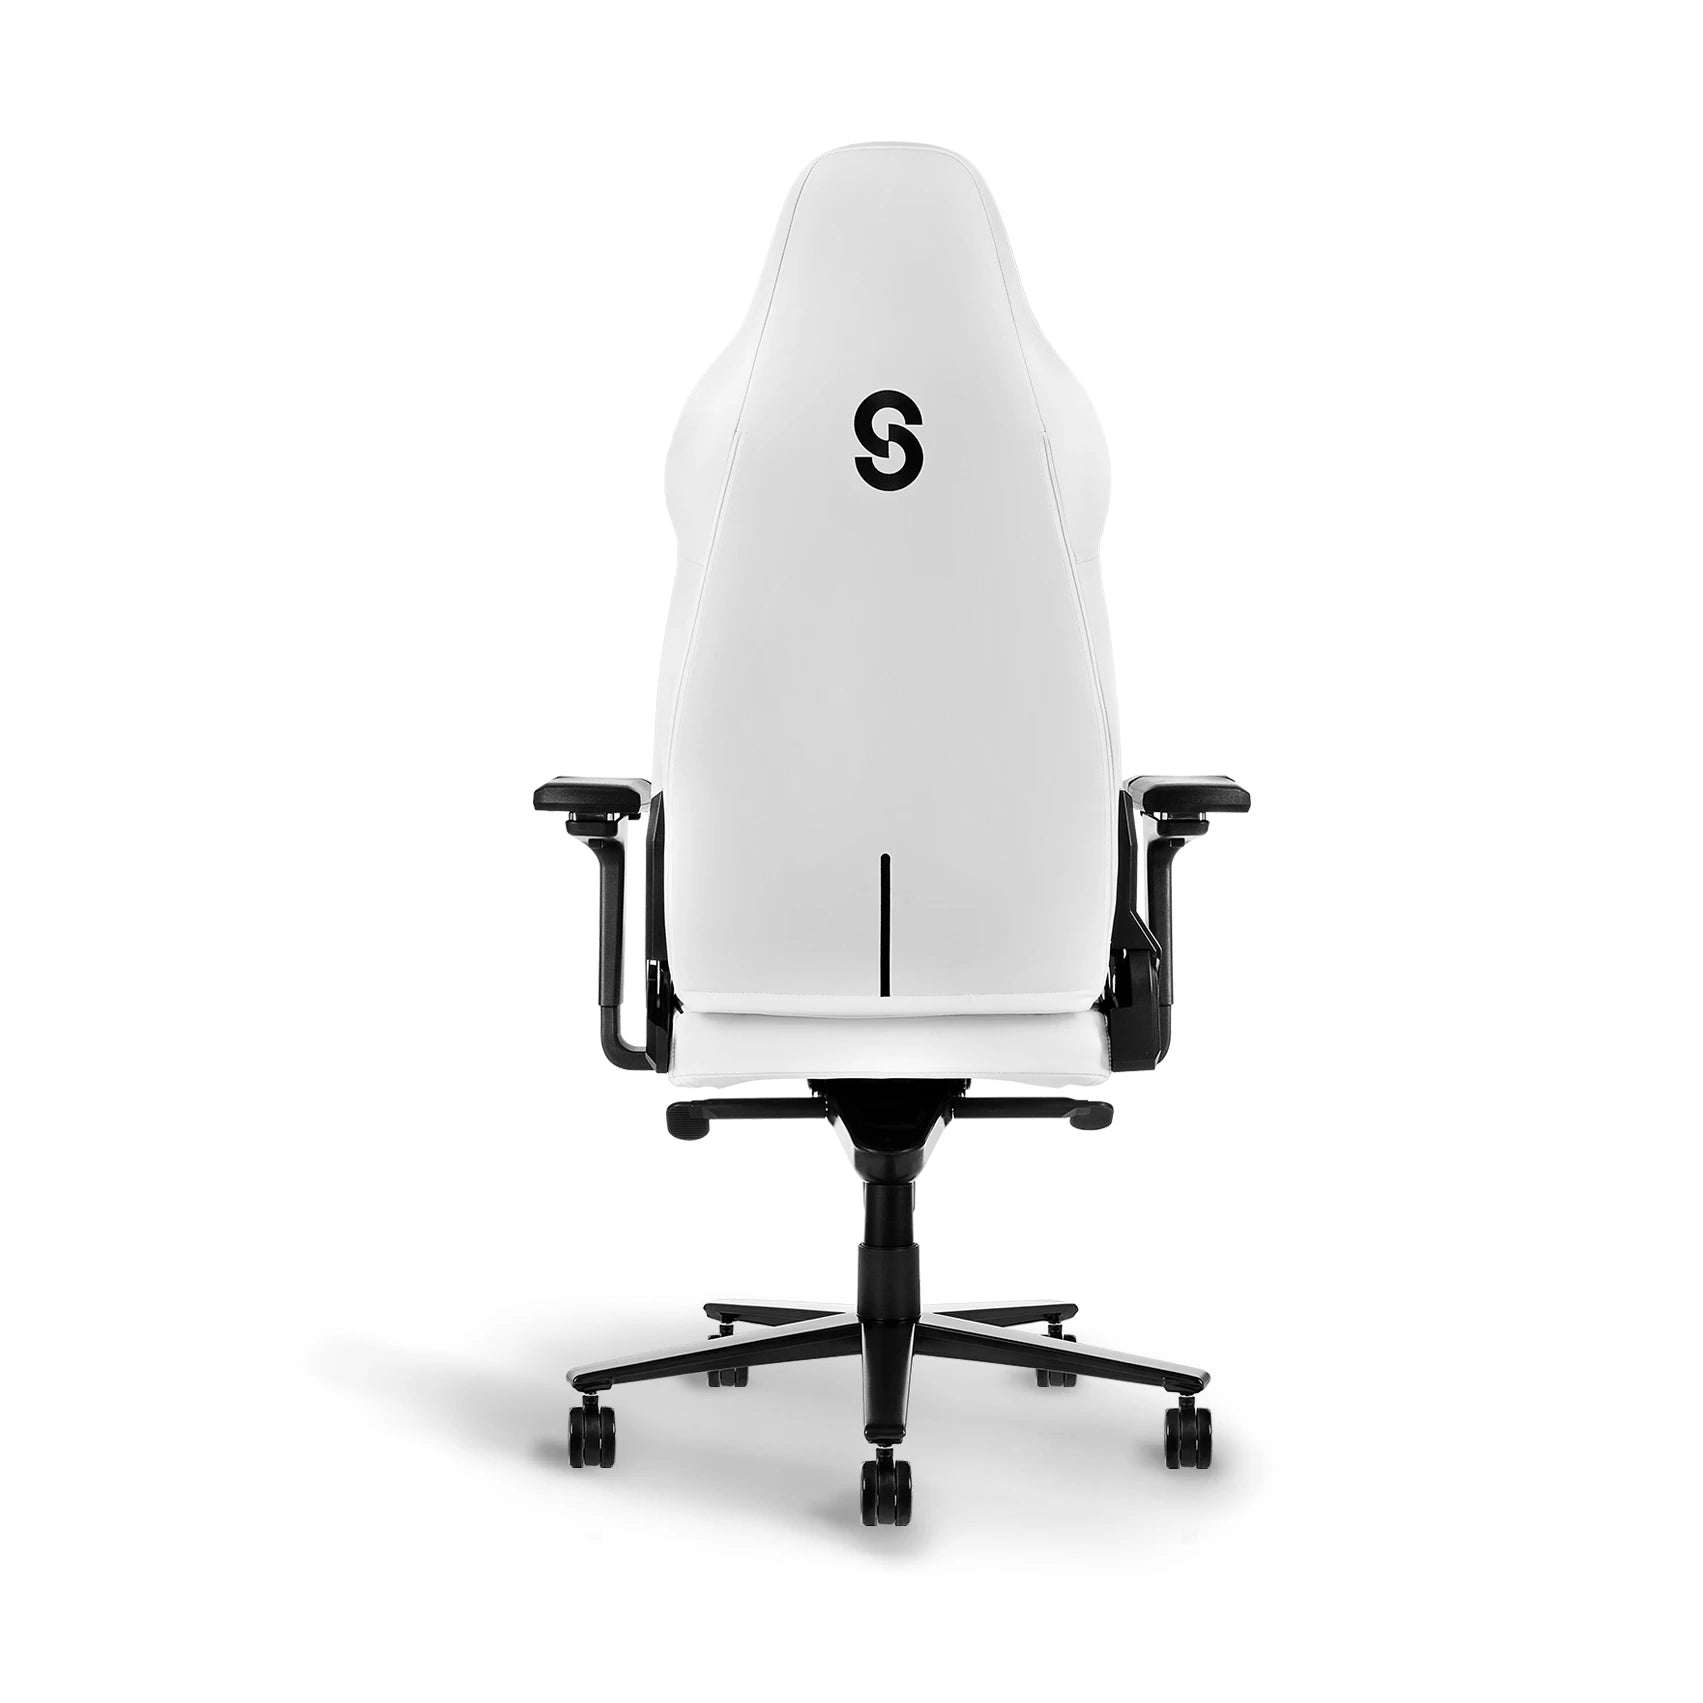 Back view of a white ergonomic gaming chair with a black 'S' logo and adjustable components.